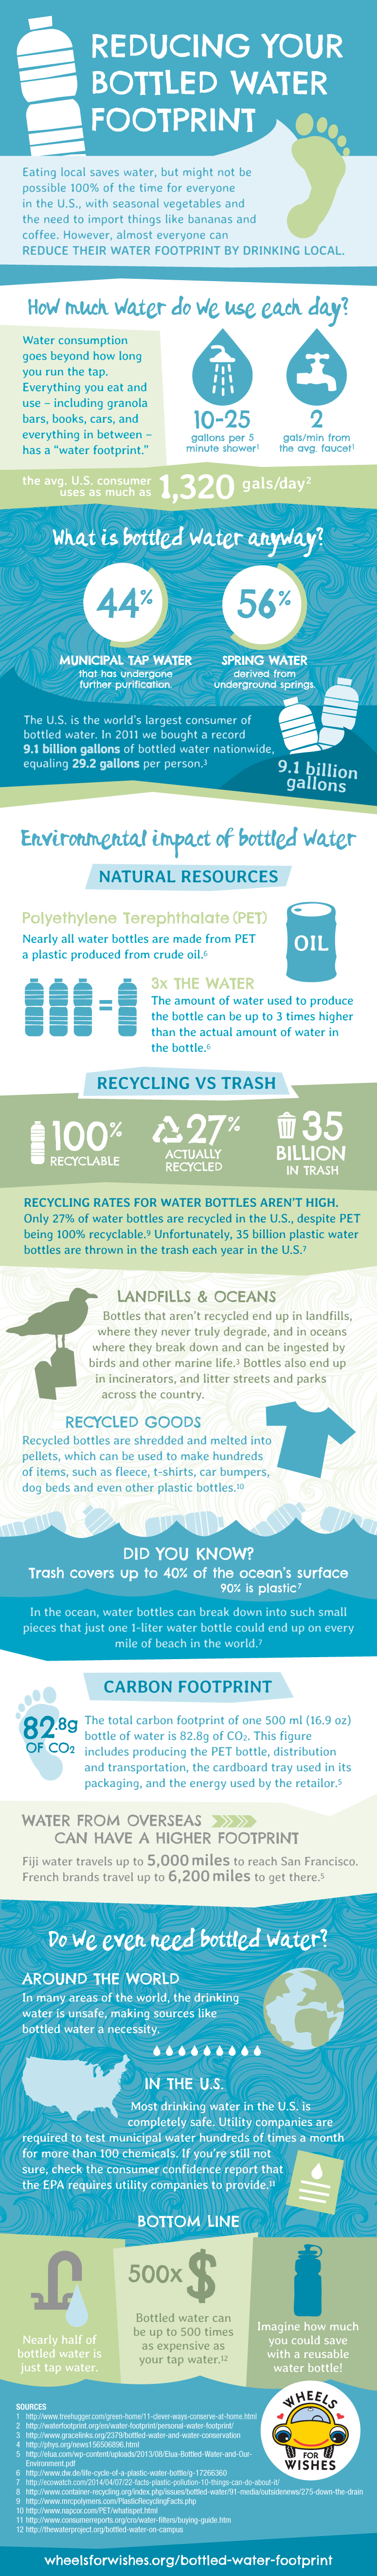 Reducing Your Bottled Water Footprint